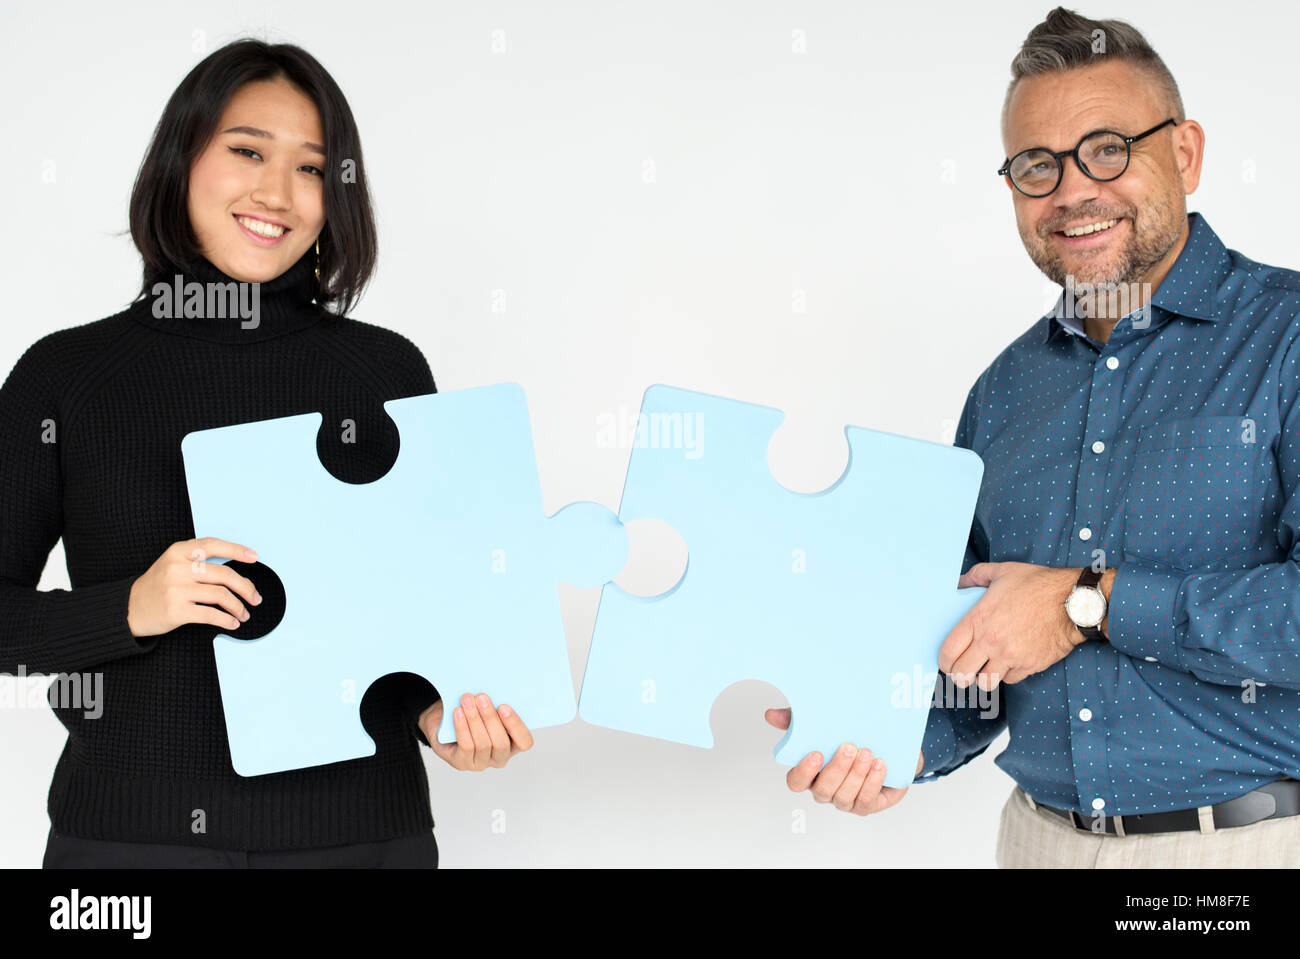 Alliance Business Collaborate Opportunity Concept Stock Photo Alamy